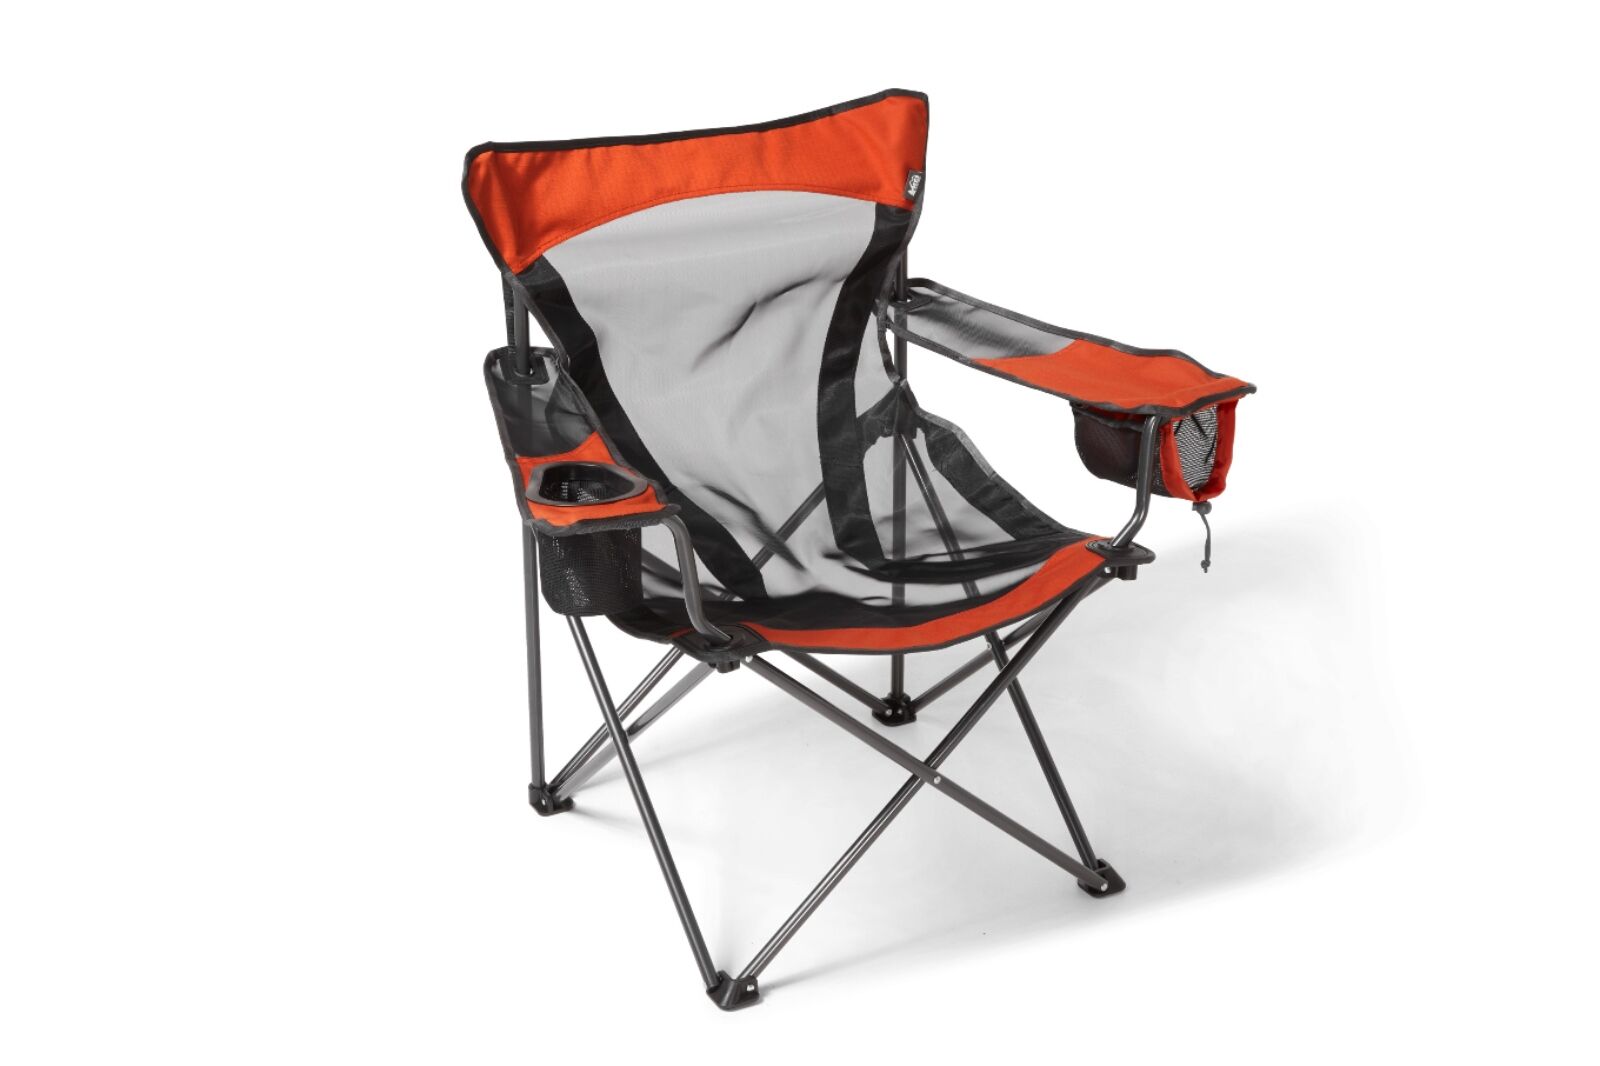 Chair in REI Labor Day sale